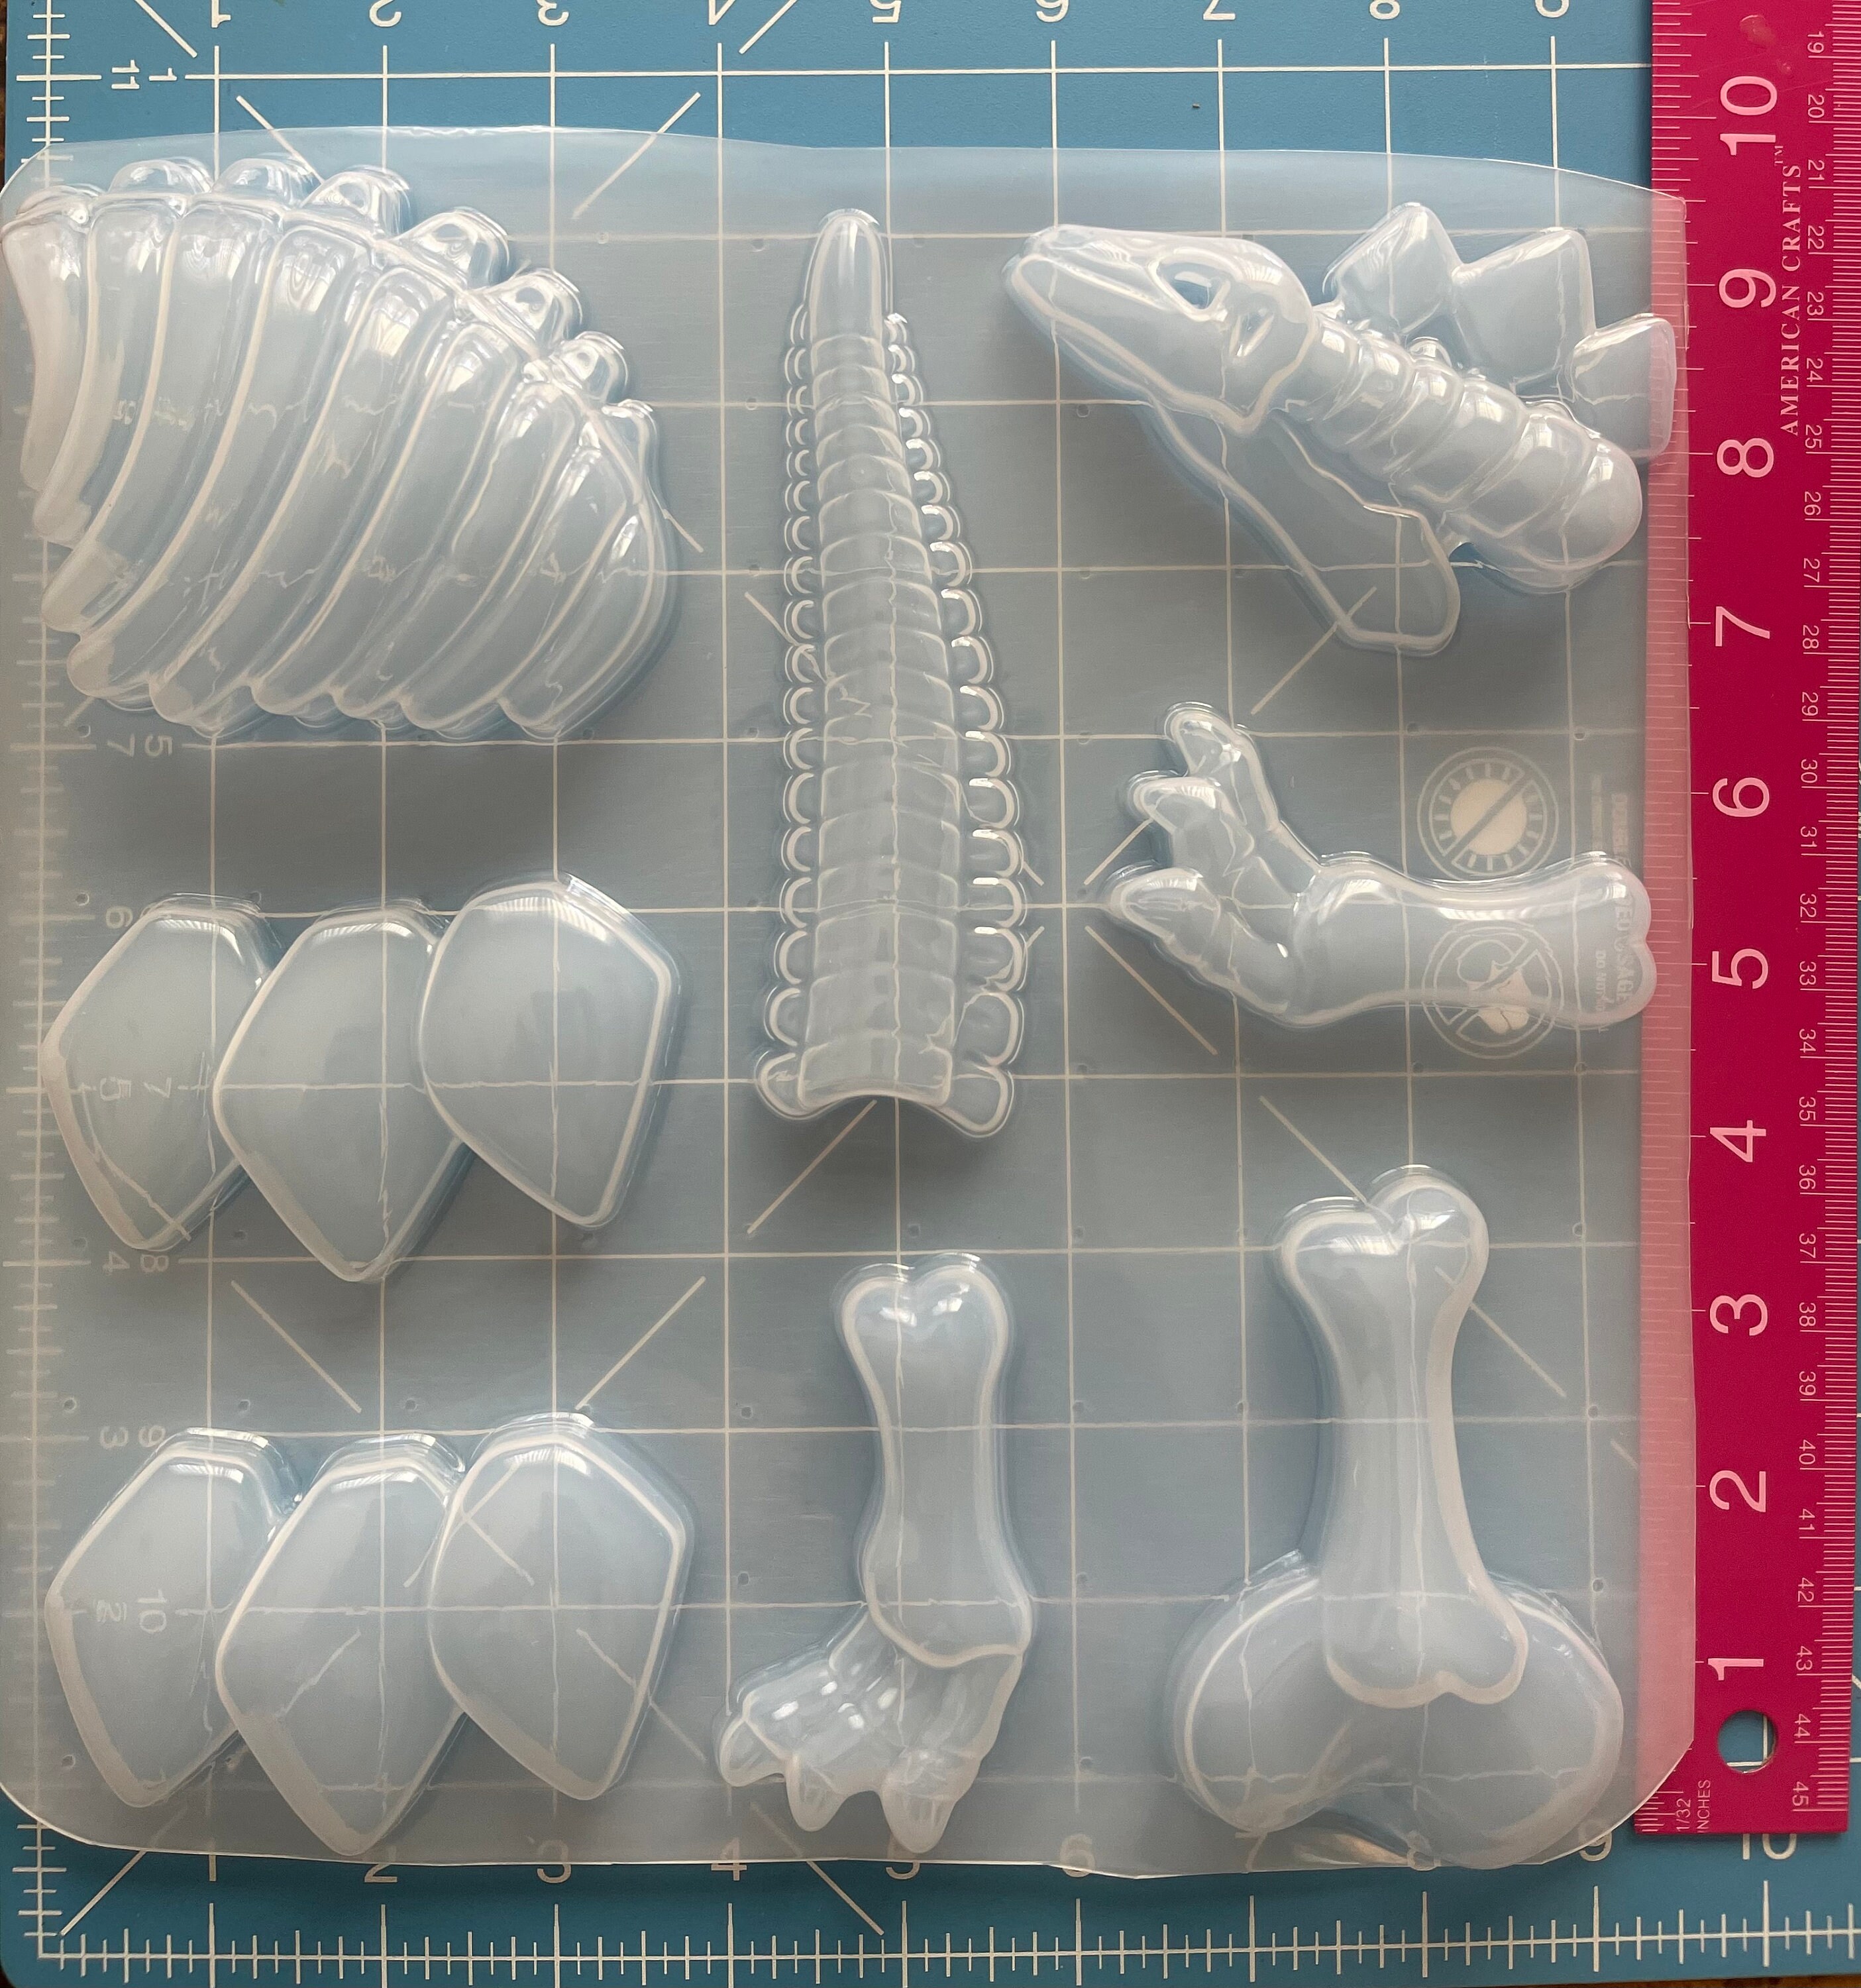 New 8Cells Jurassic Dinosaur Silicone Molds for DIY Ice Tray Food